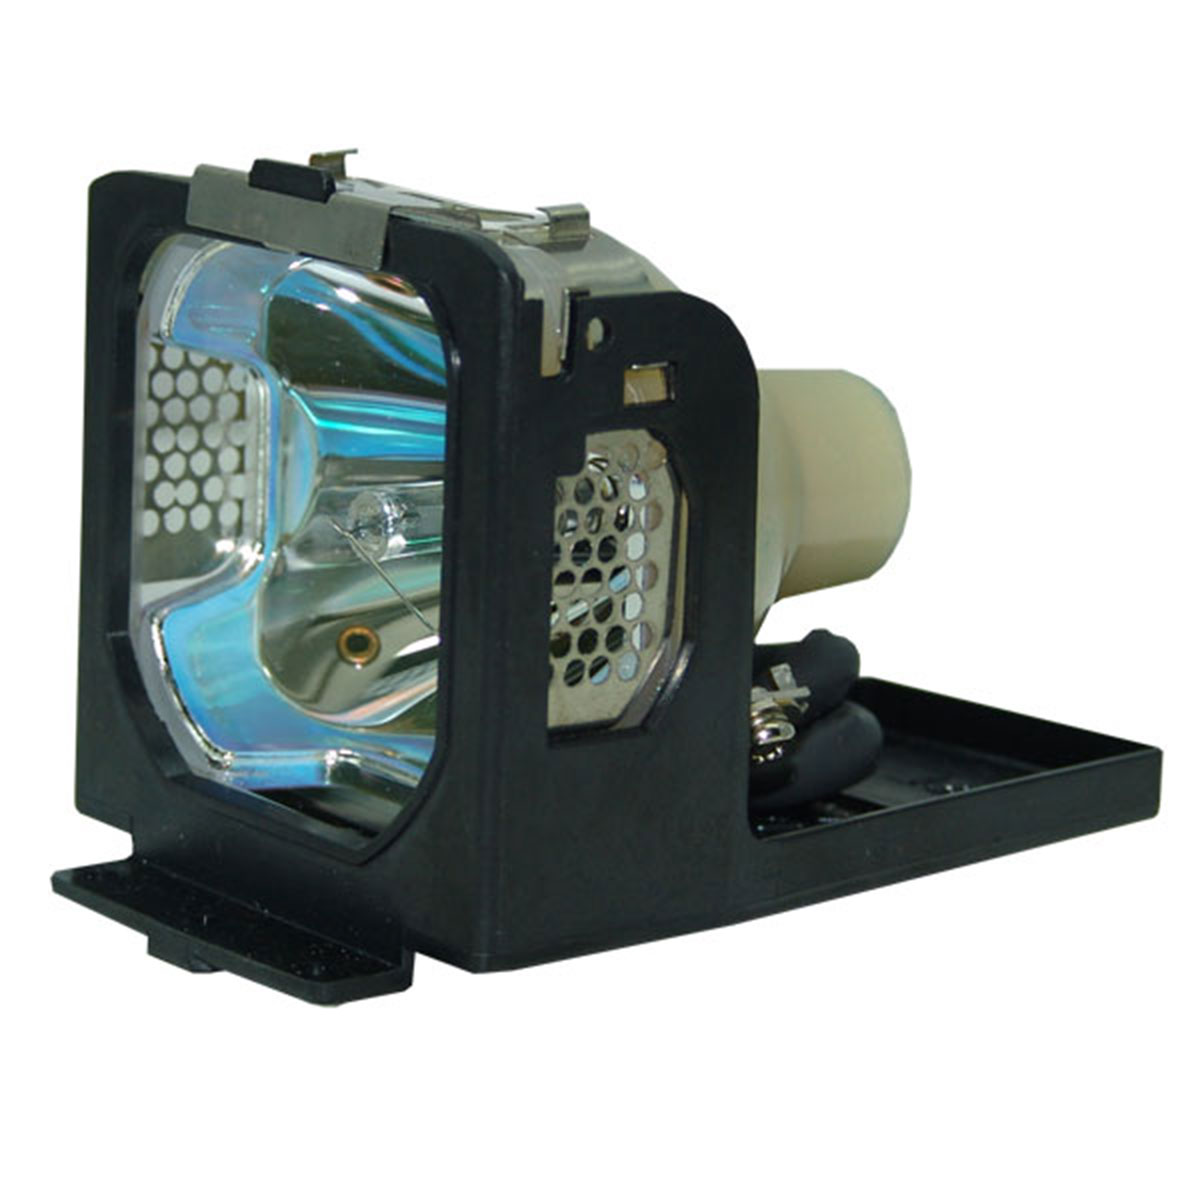 OEM 610-300-7267 Replacement Lamp & Housing for Boxlight Projectors - image 2 of 7